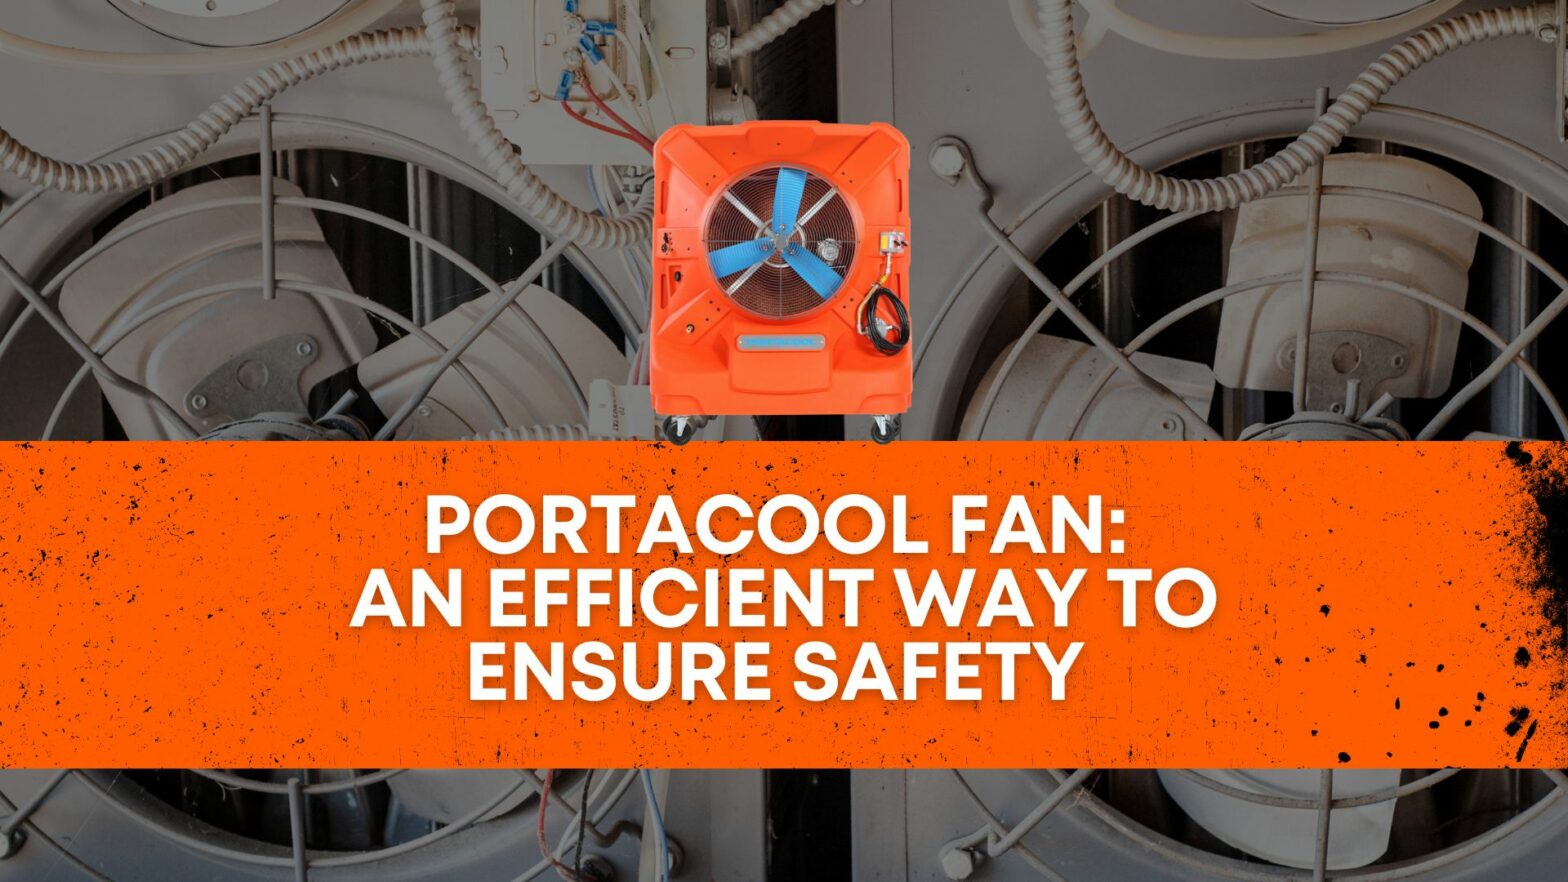 Portacool Fan An efficient way to ensure safety